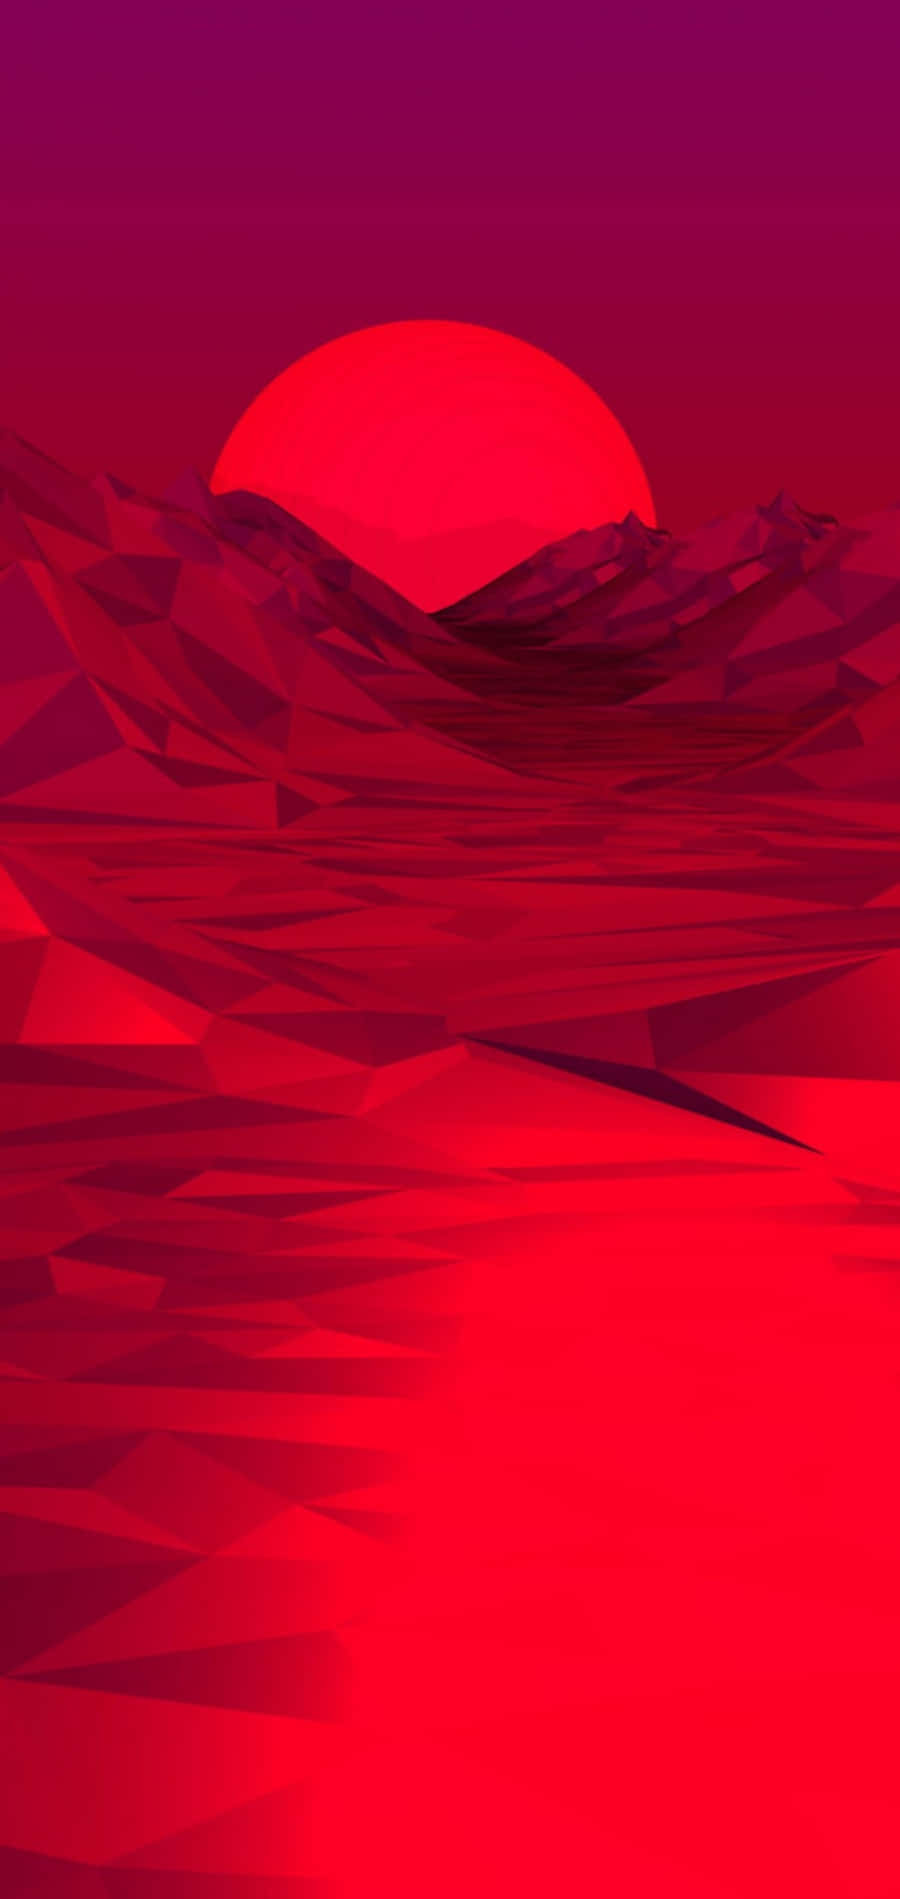 A Specimin Of Beauty - Red iPhone X Wallpaper